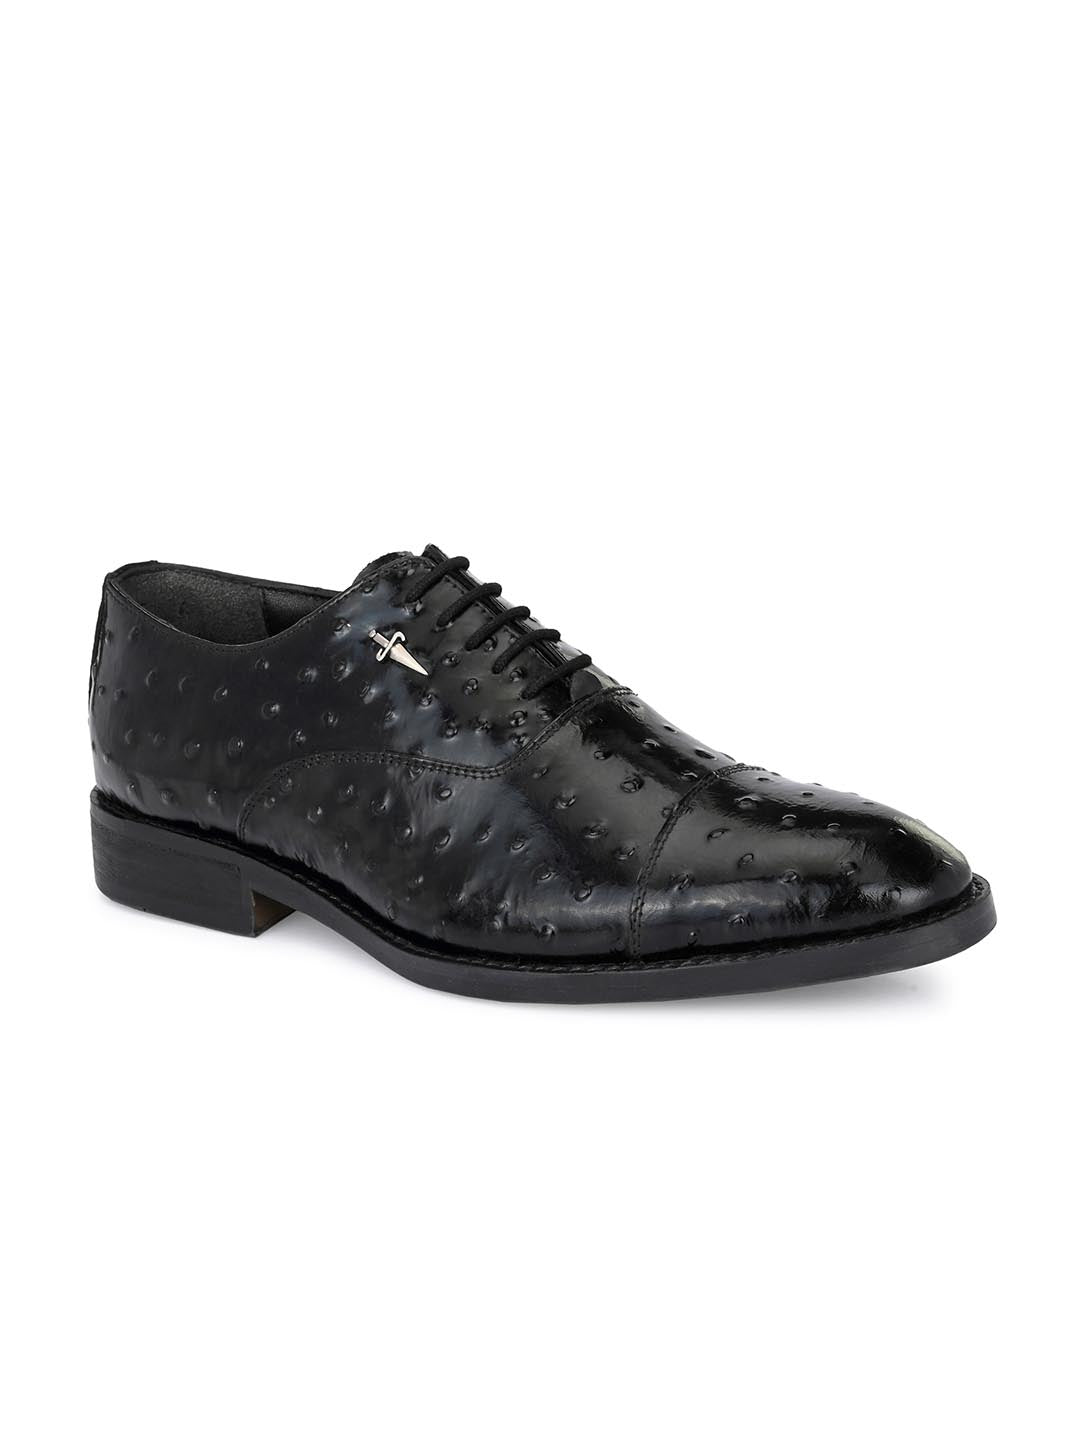 Leather Shoes - Upto 50% to 80% OFF on Leather Shoes Online